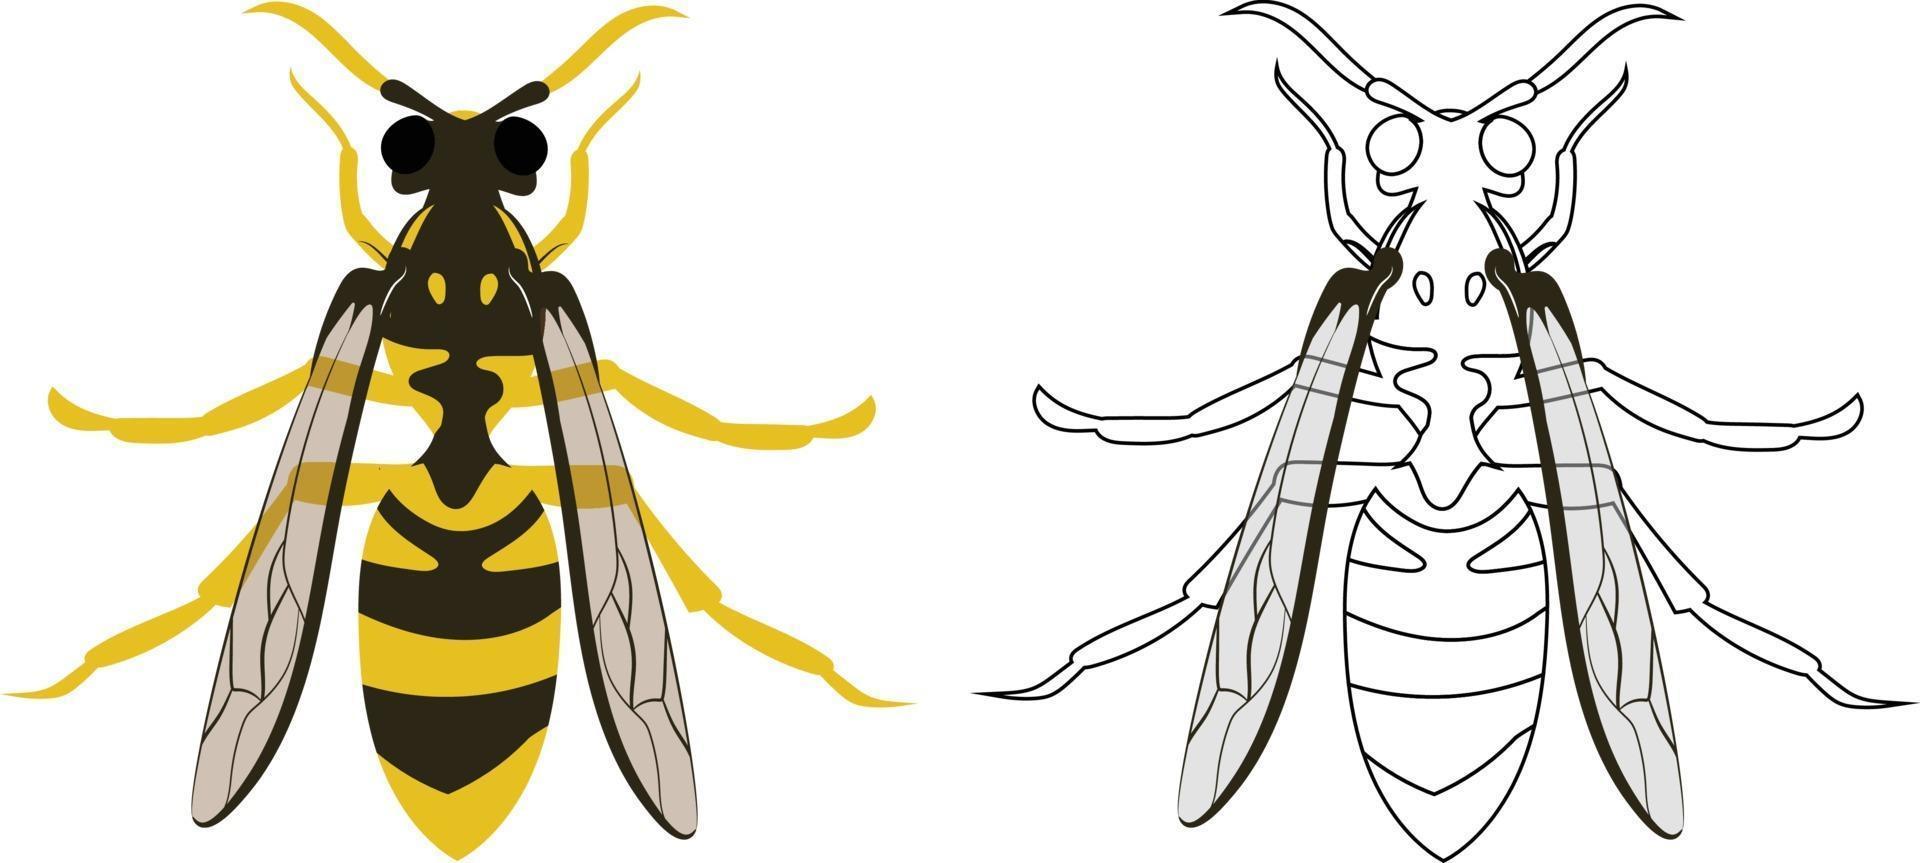 Hornet or Wasp Vector Illustration Fill and Outline Isolated